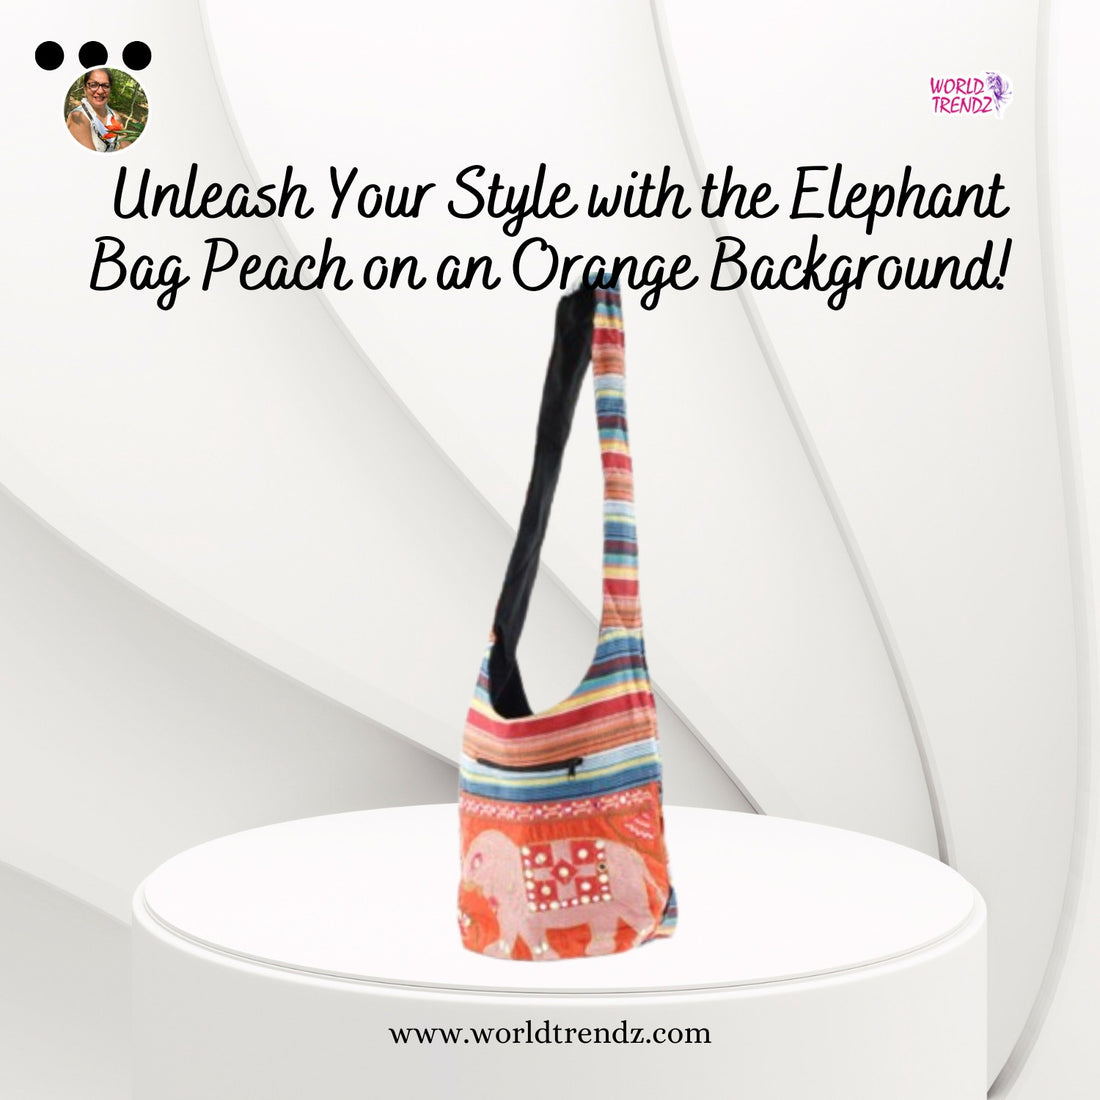 Elephant Bag Peach with Orange Background: A Harmonious Blend of Nature and Fashion